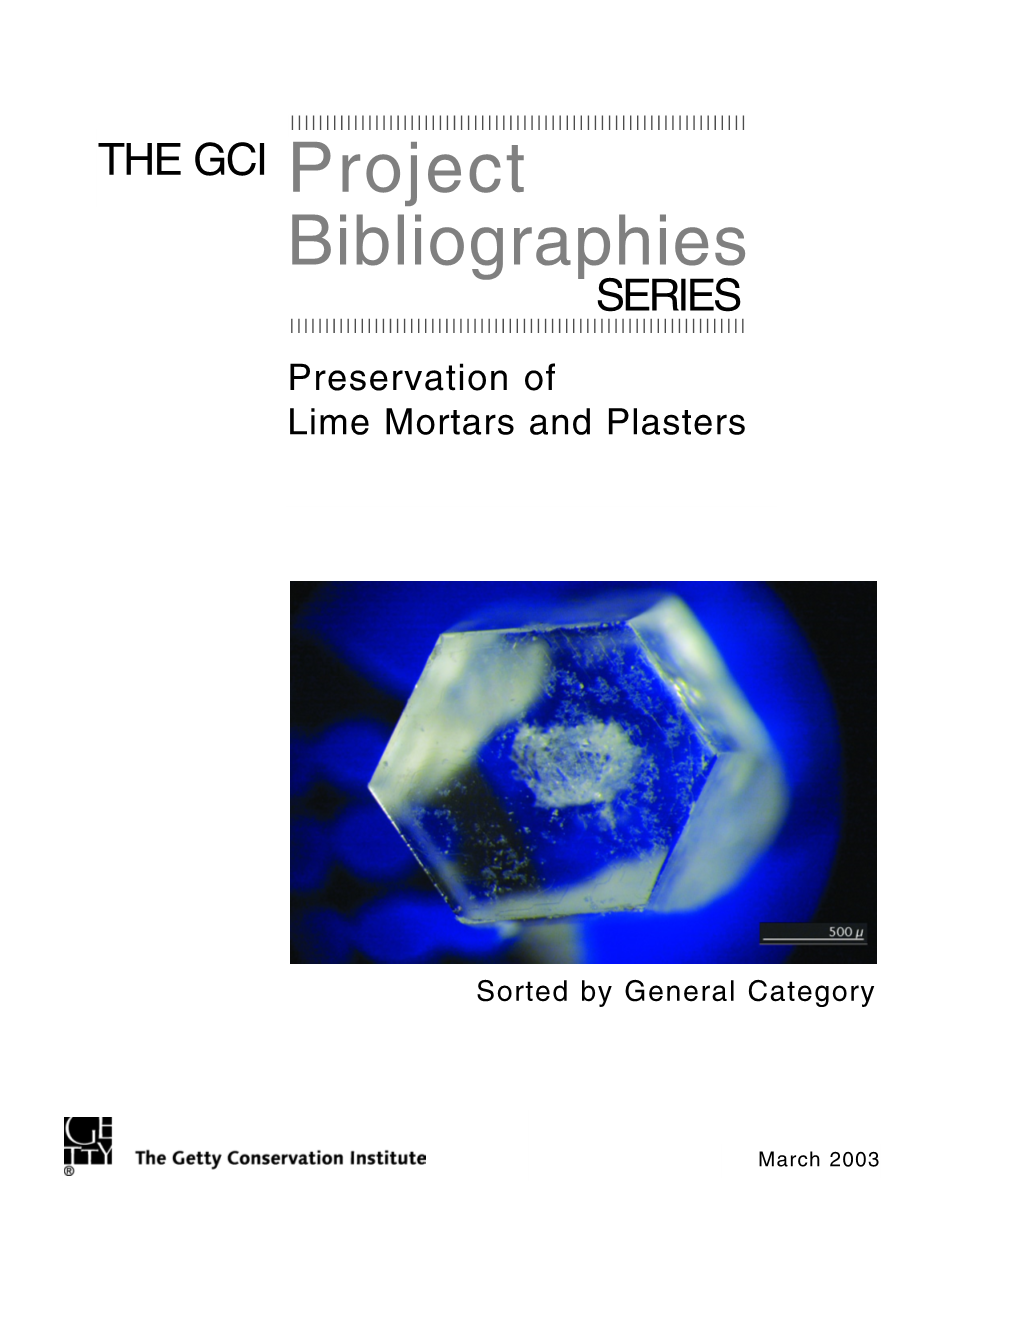 GCI Lime Mortars & Plasters Bibliography: Sorted General Category